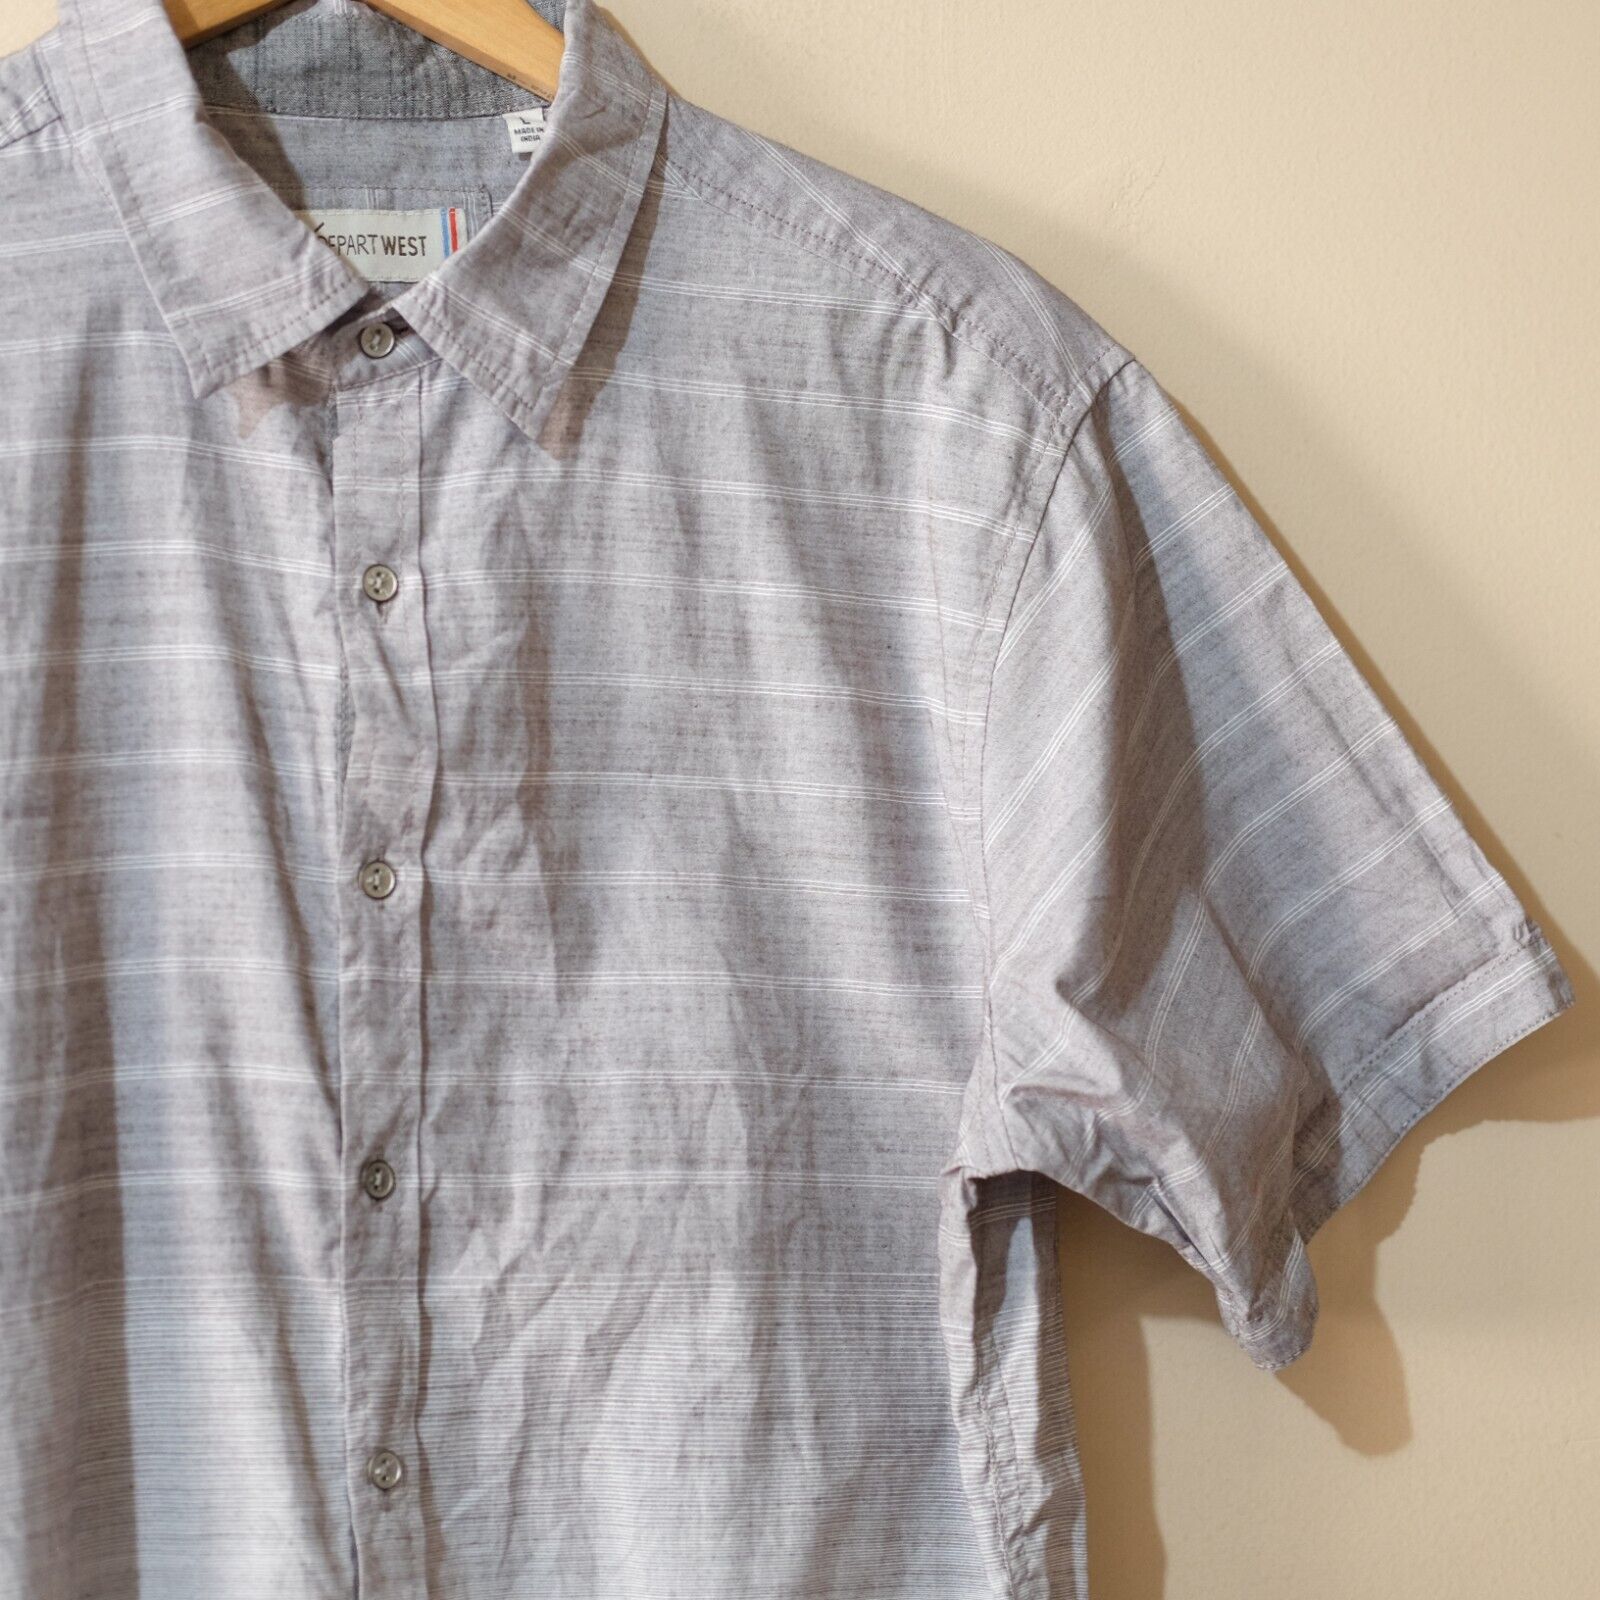 Depart West Shirt Button Up Short Sleeve Grey/Whi… - image 3